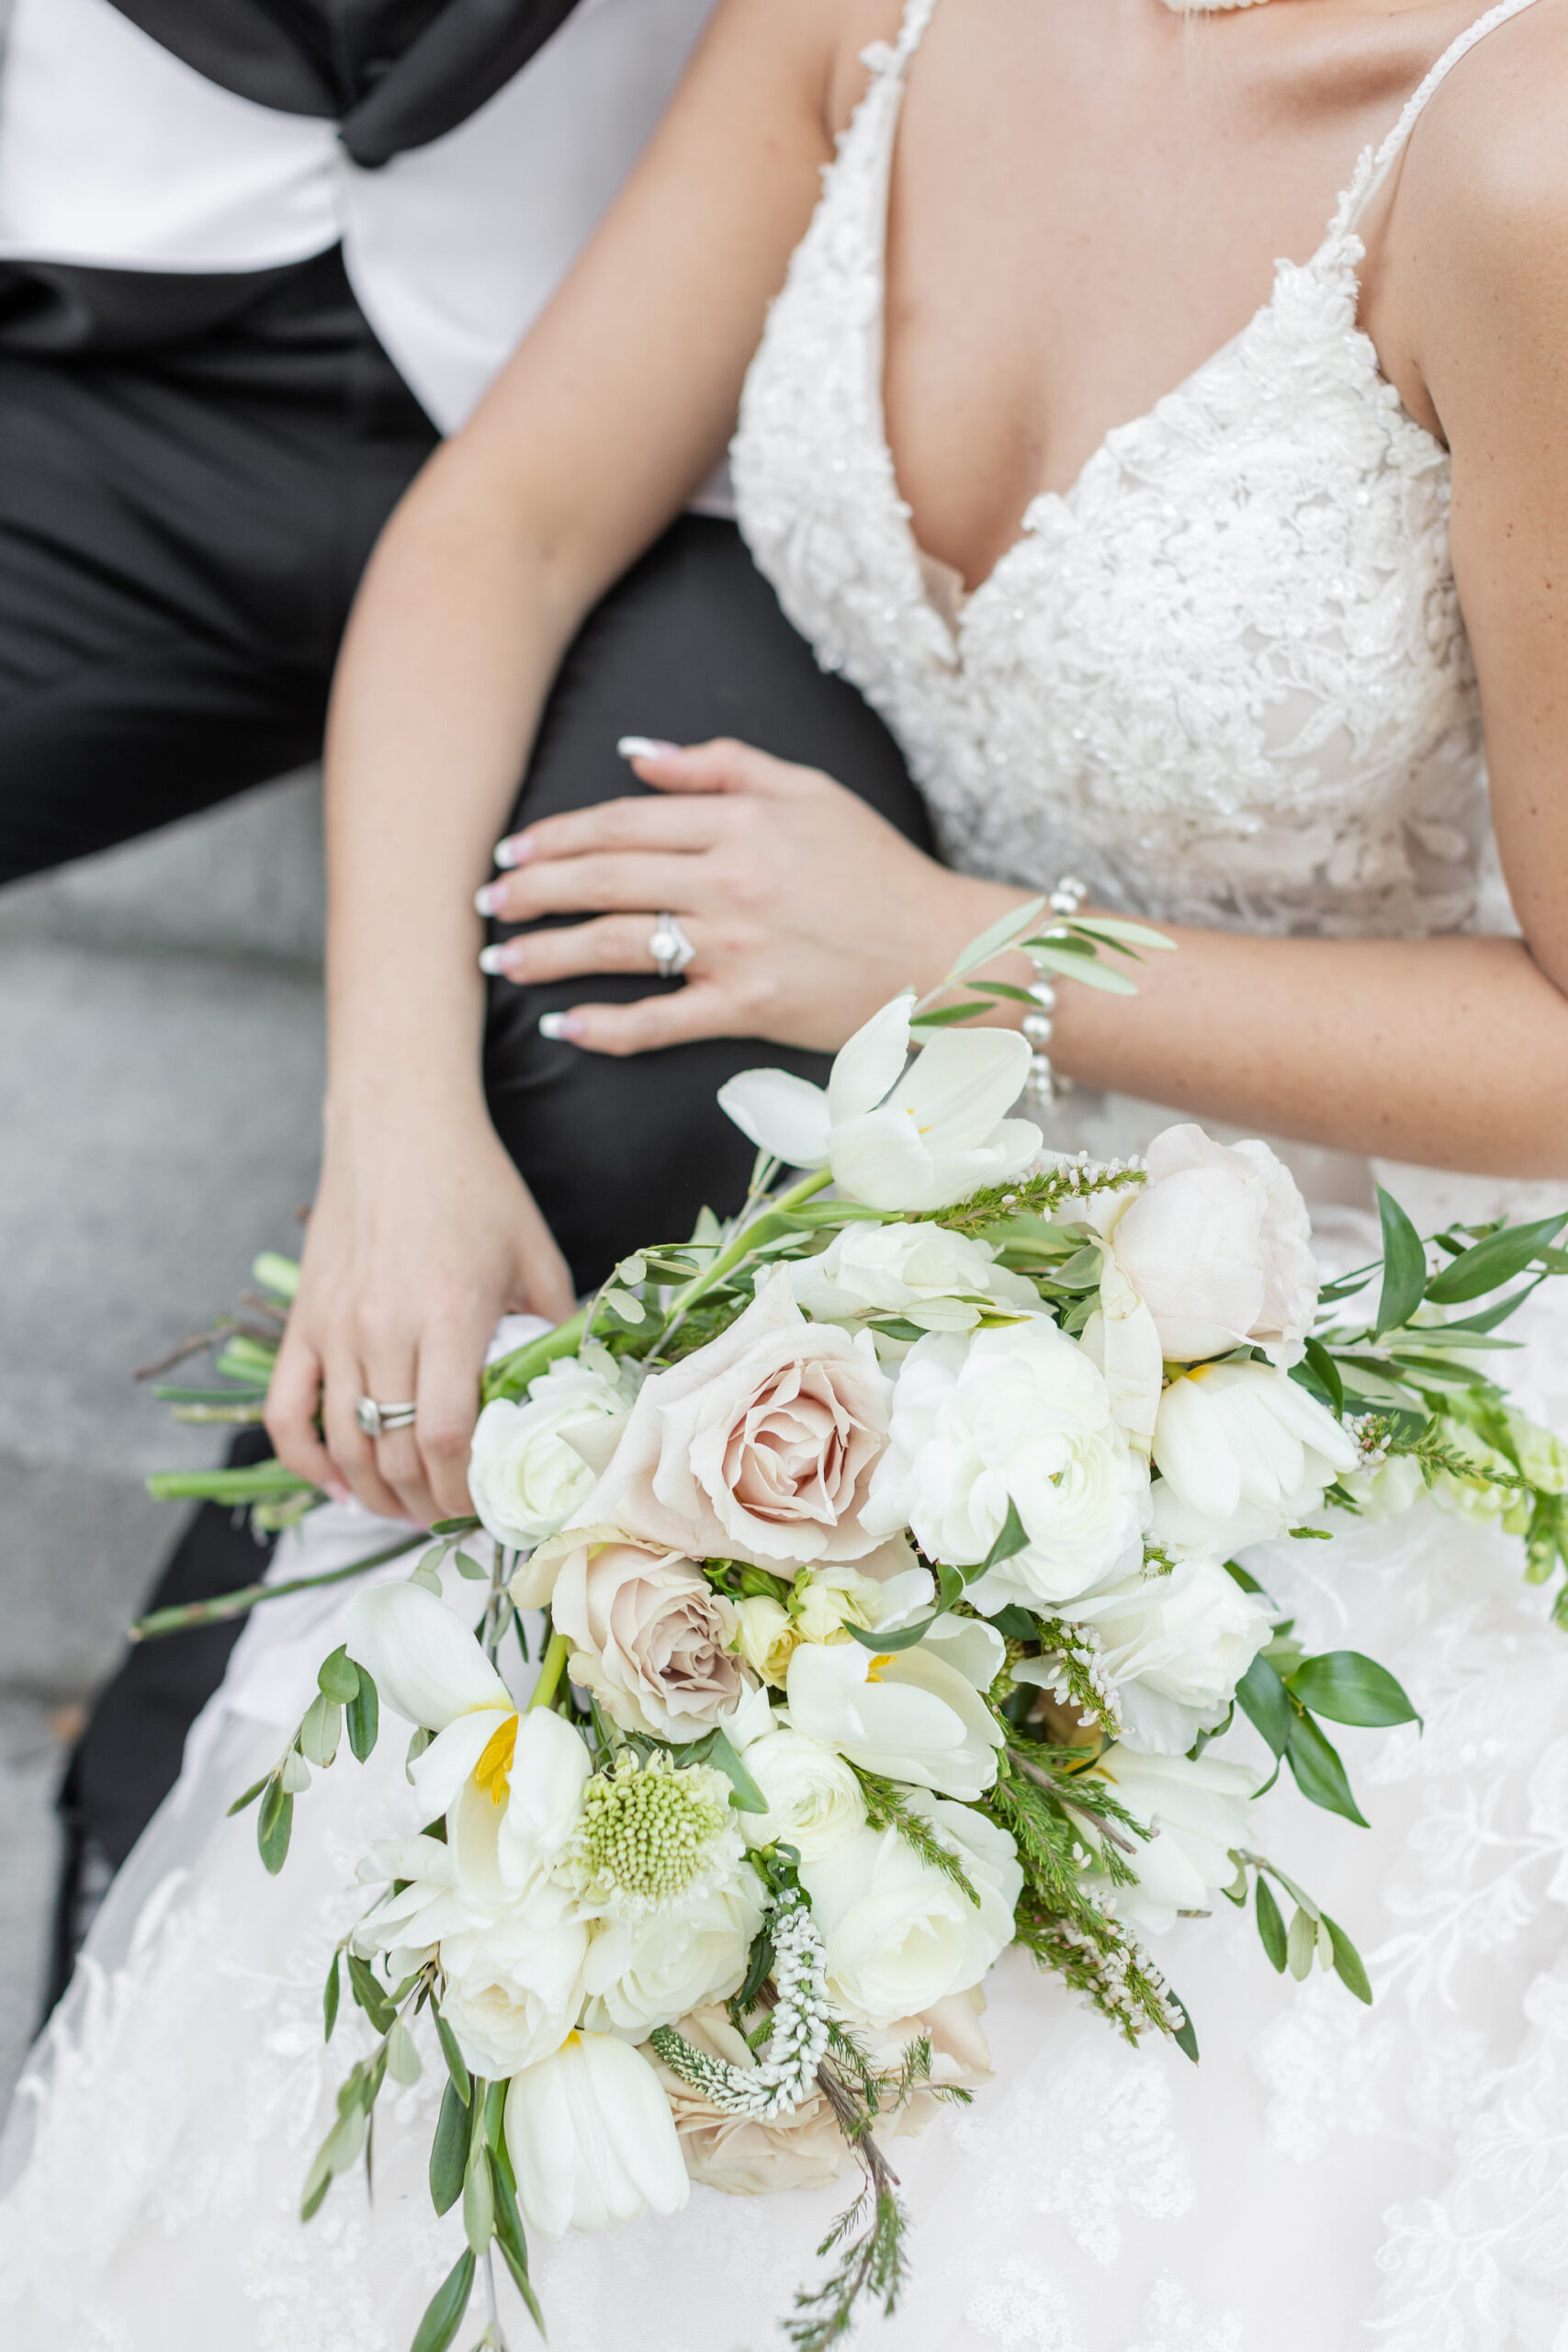 Modern Romantic Wedding, White and Blush Pink Ross with Greenery Floral Bridal Bouquet